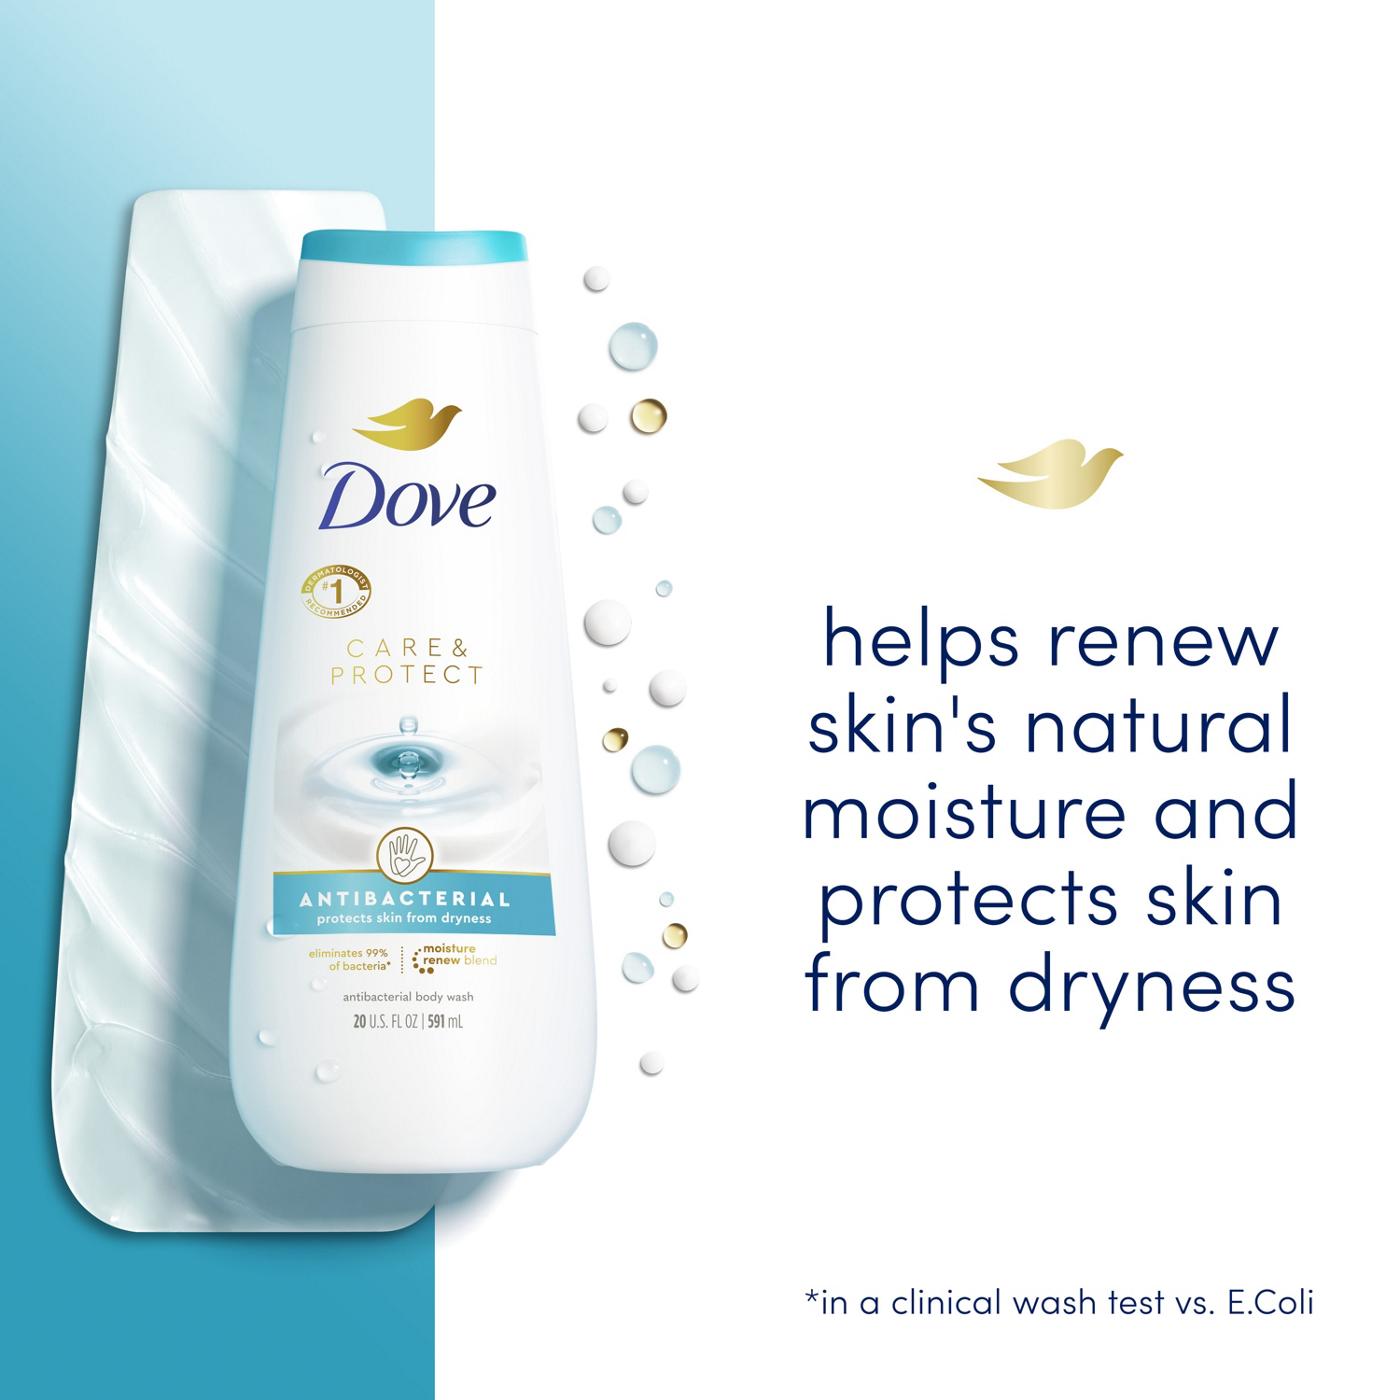 Dove Care & Protect Antibacterial Body Wash; image 5 of 8